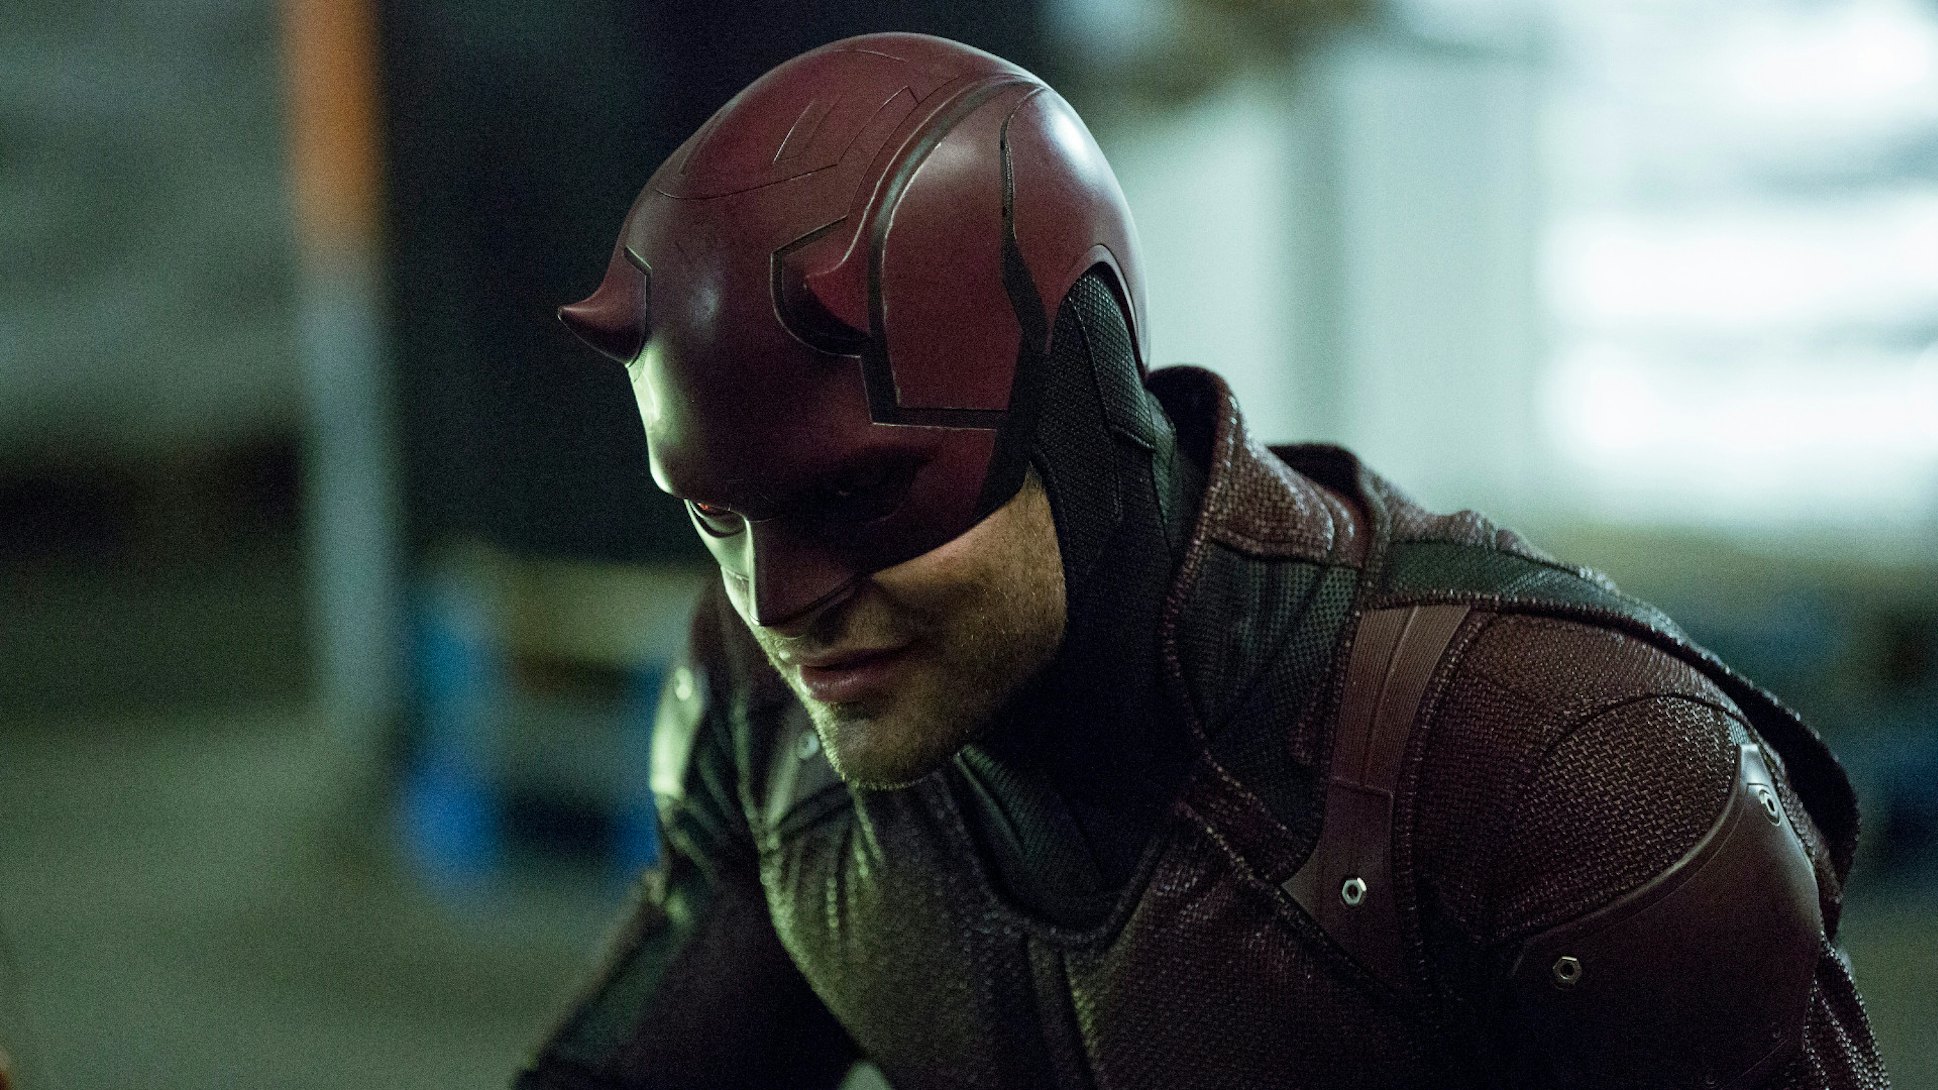 Daredevil On Disney Plus The 5 Best Episodes You Need To Watch Asap